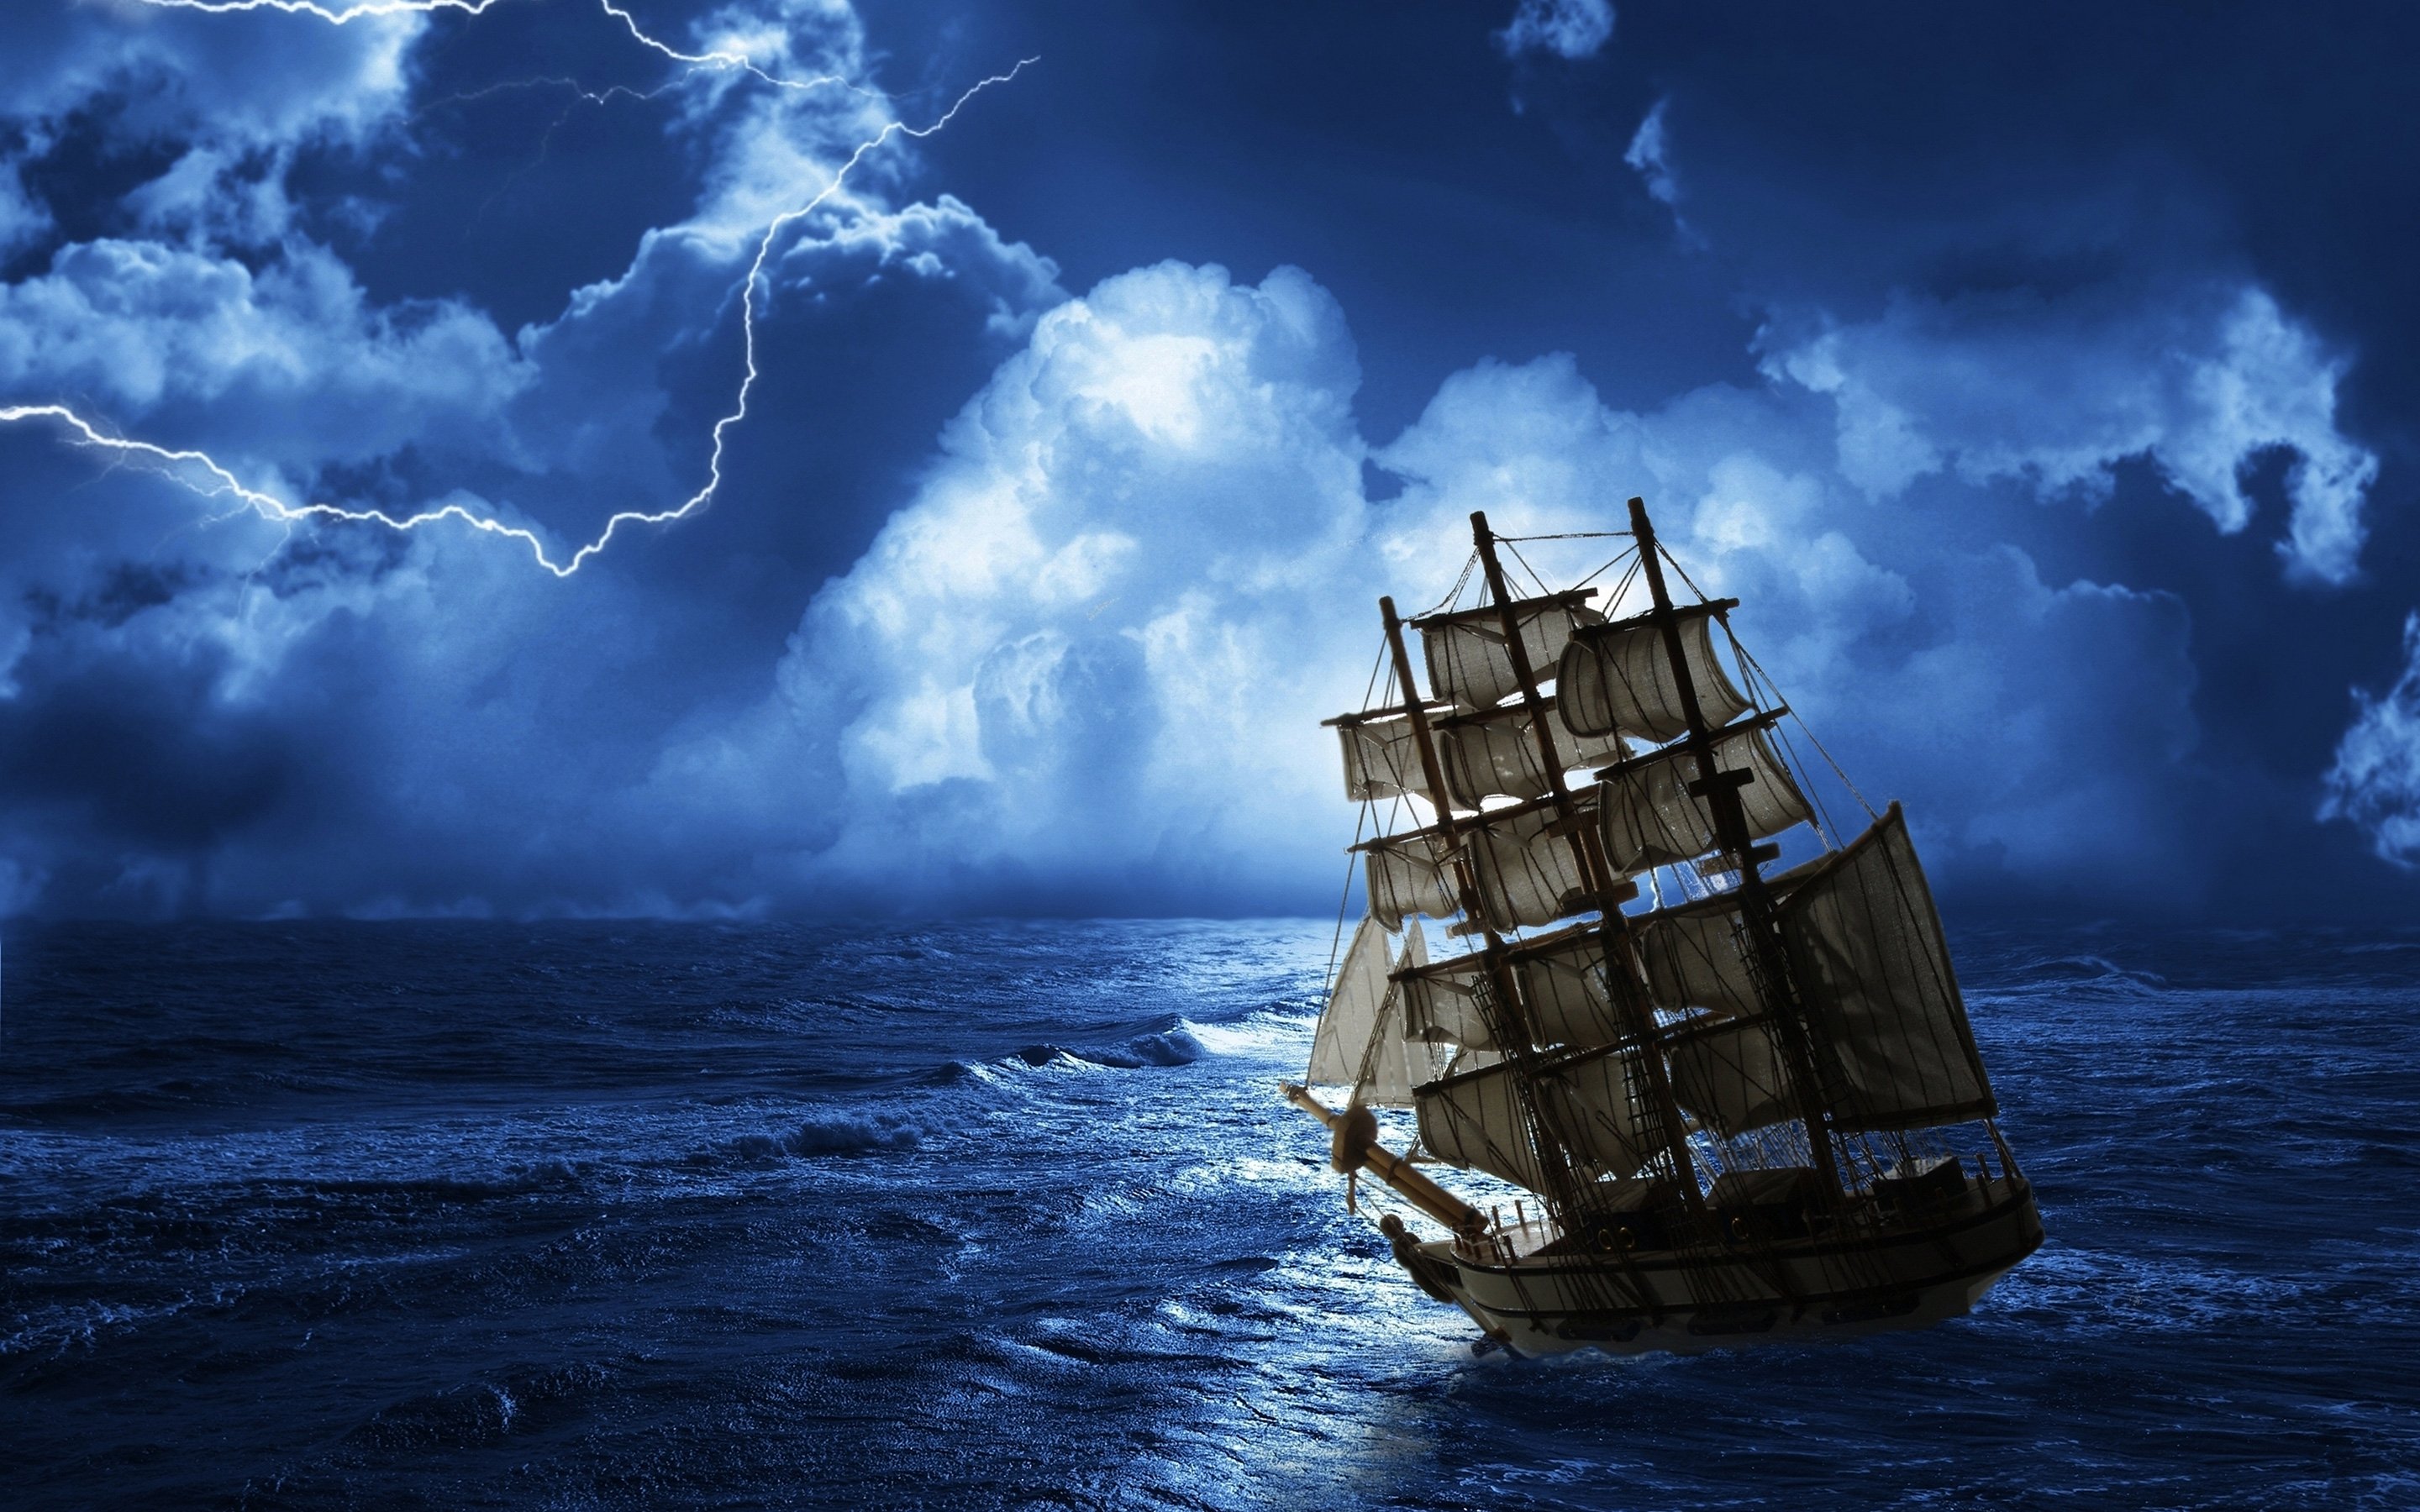 Ship Wallpaper Image In HD Available Here For